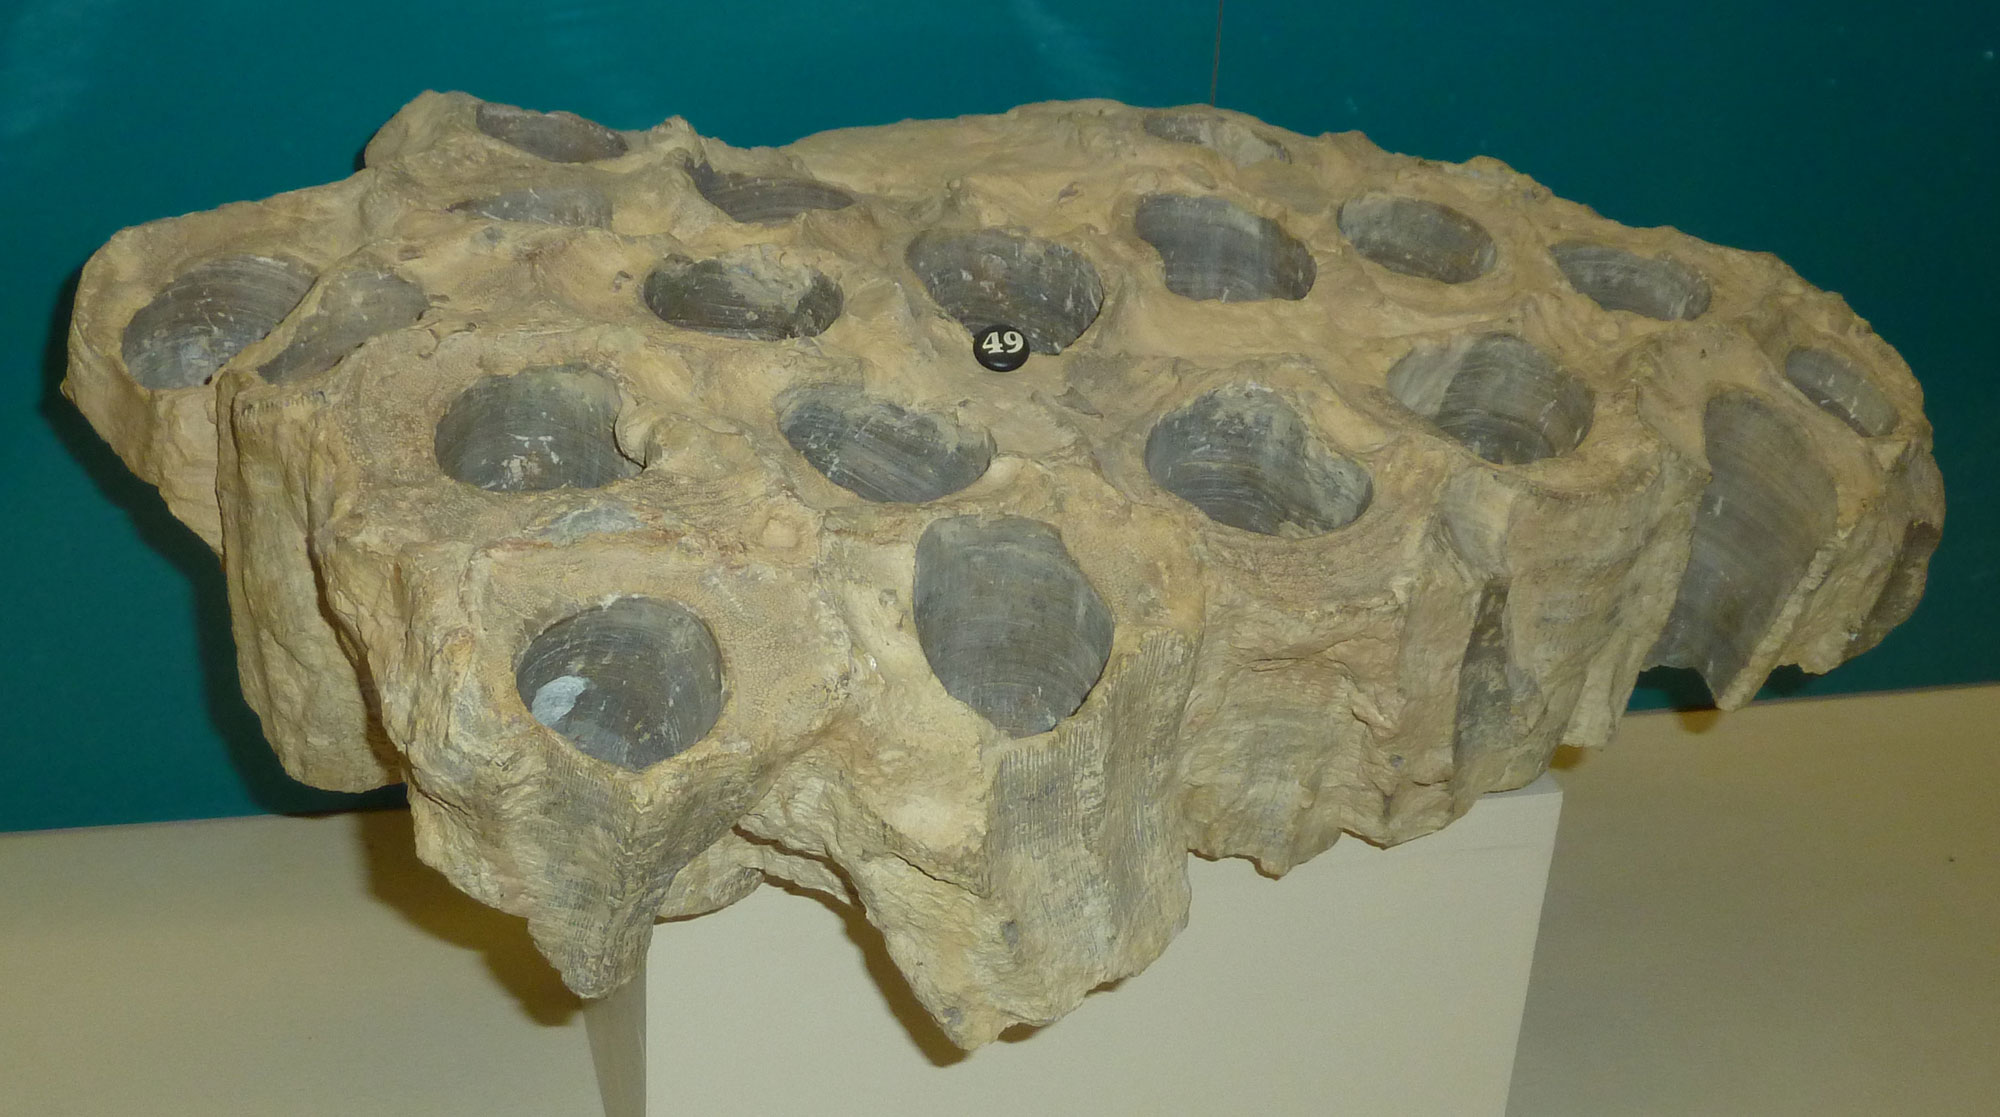 Photo of a group of rudist bivalves. The bivalves look like a chunk of rock with large circular holes on the upper side.